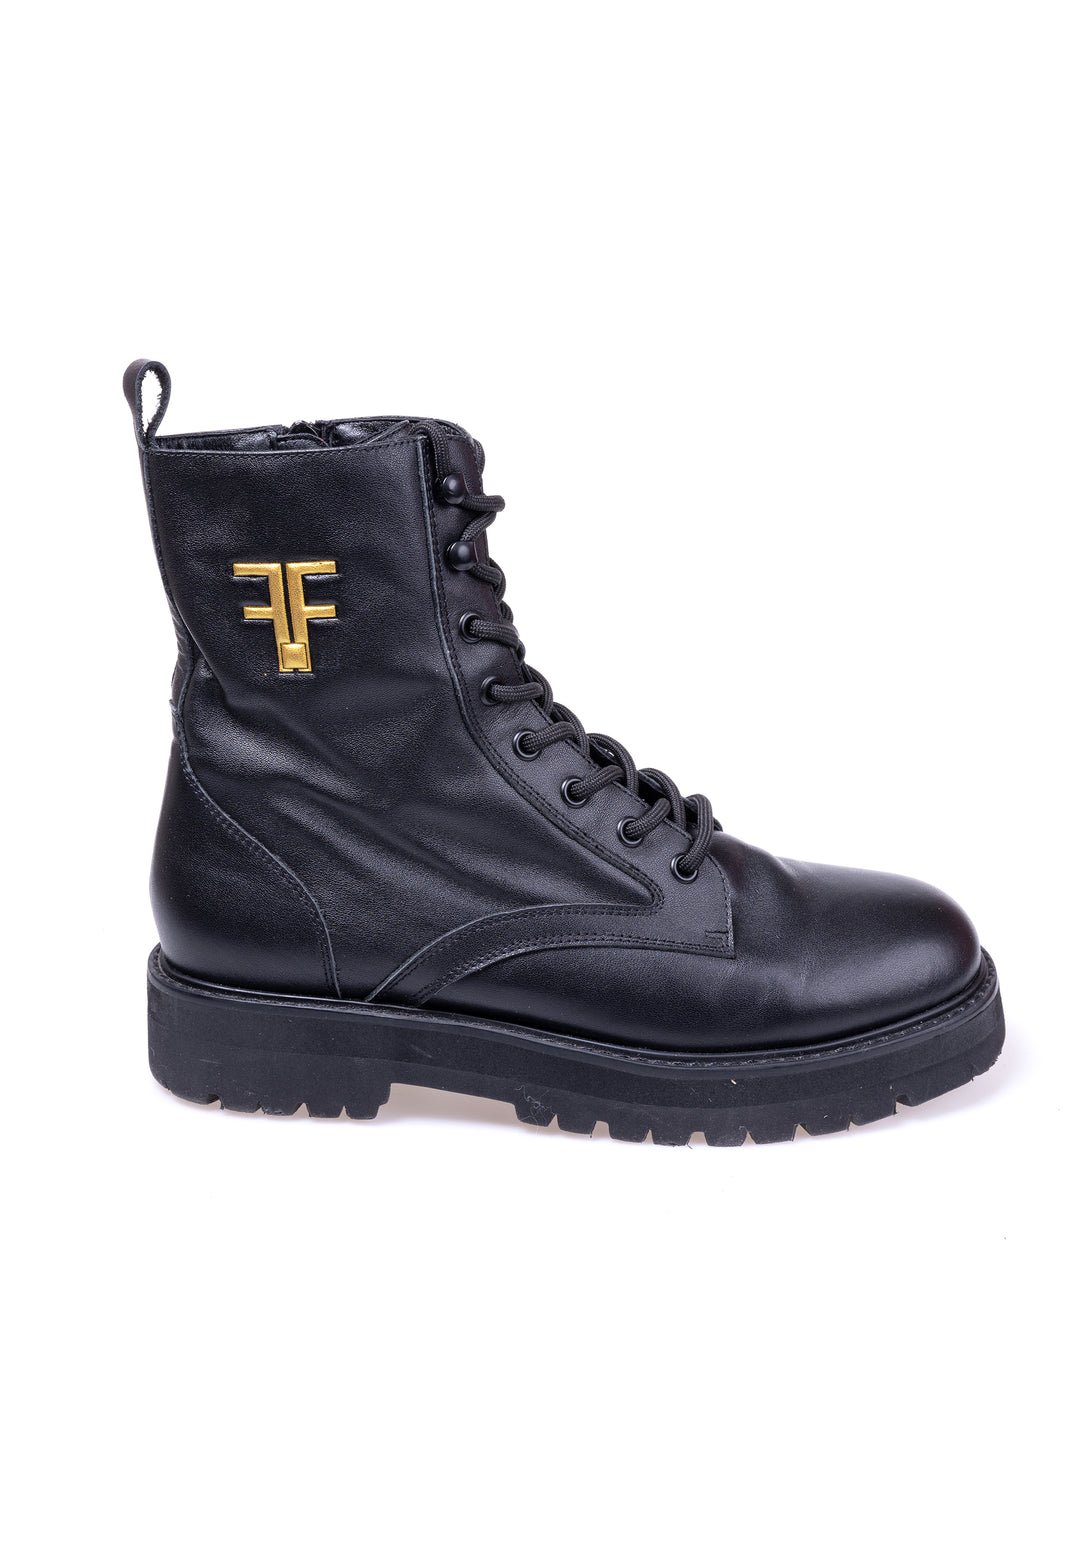 Combat boots made in leather with front lacing